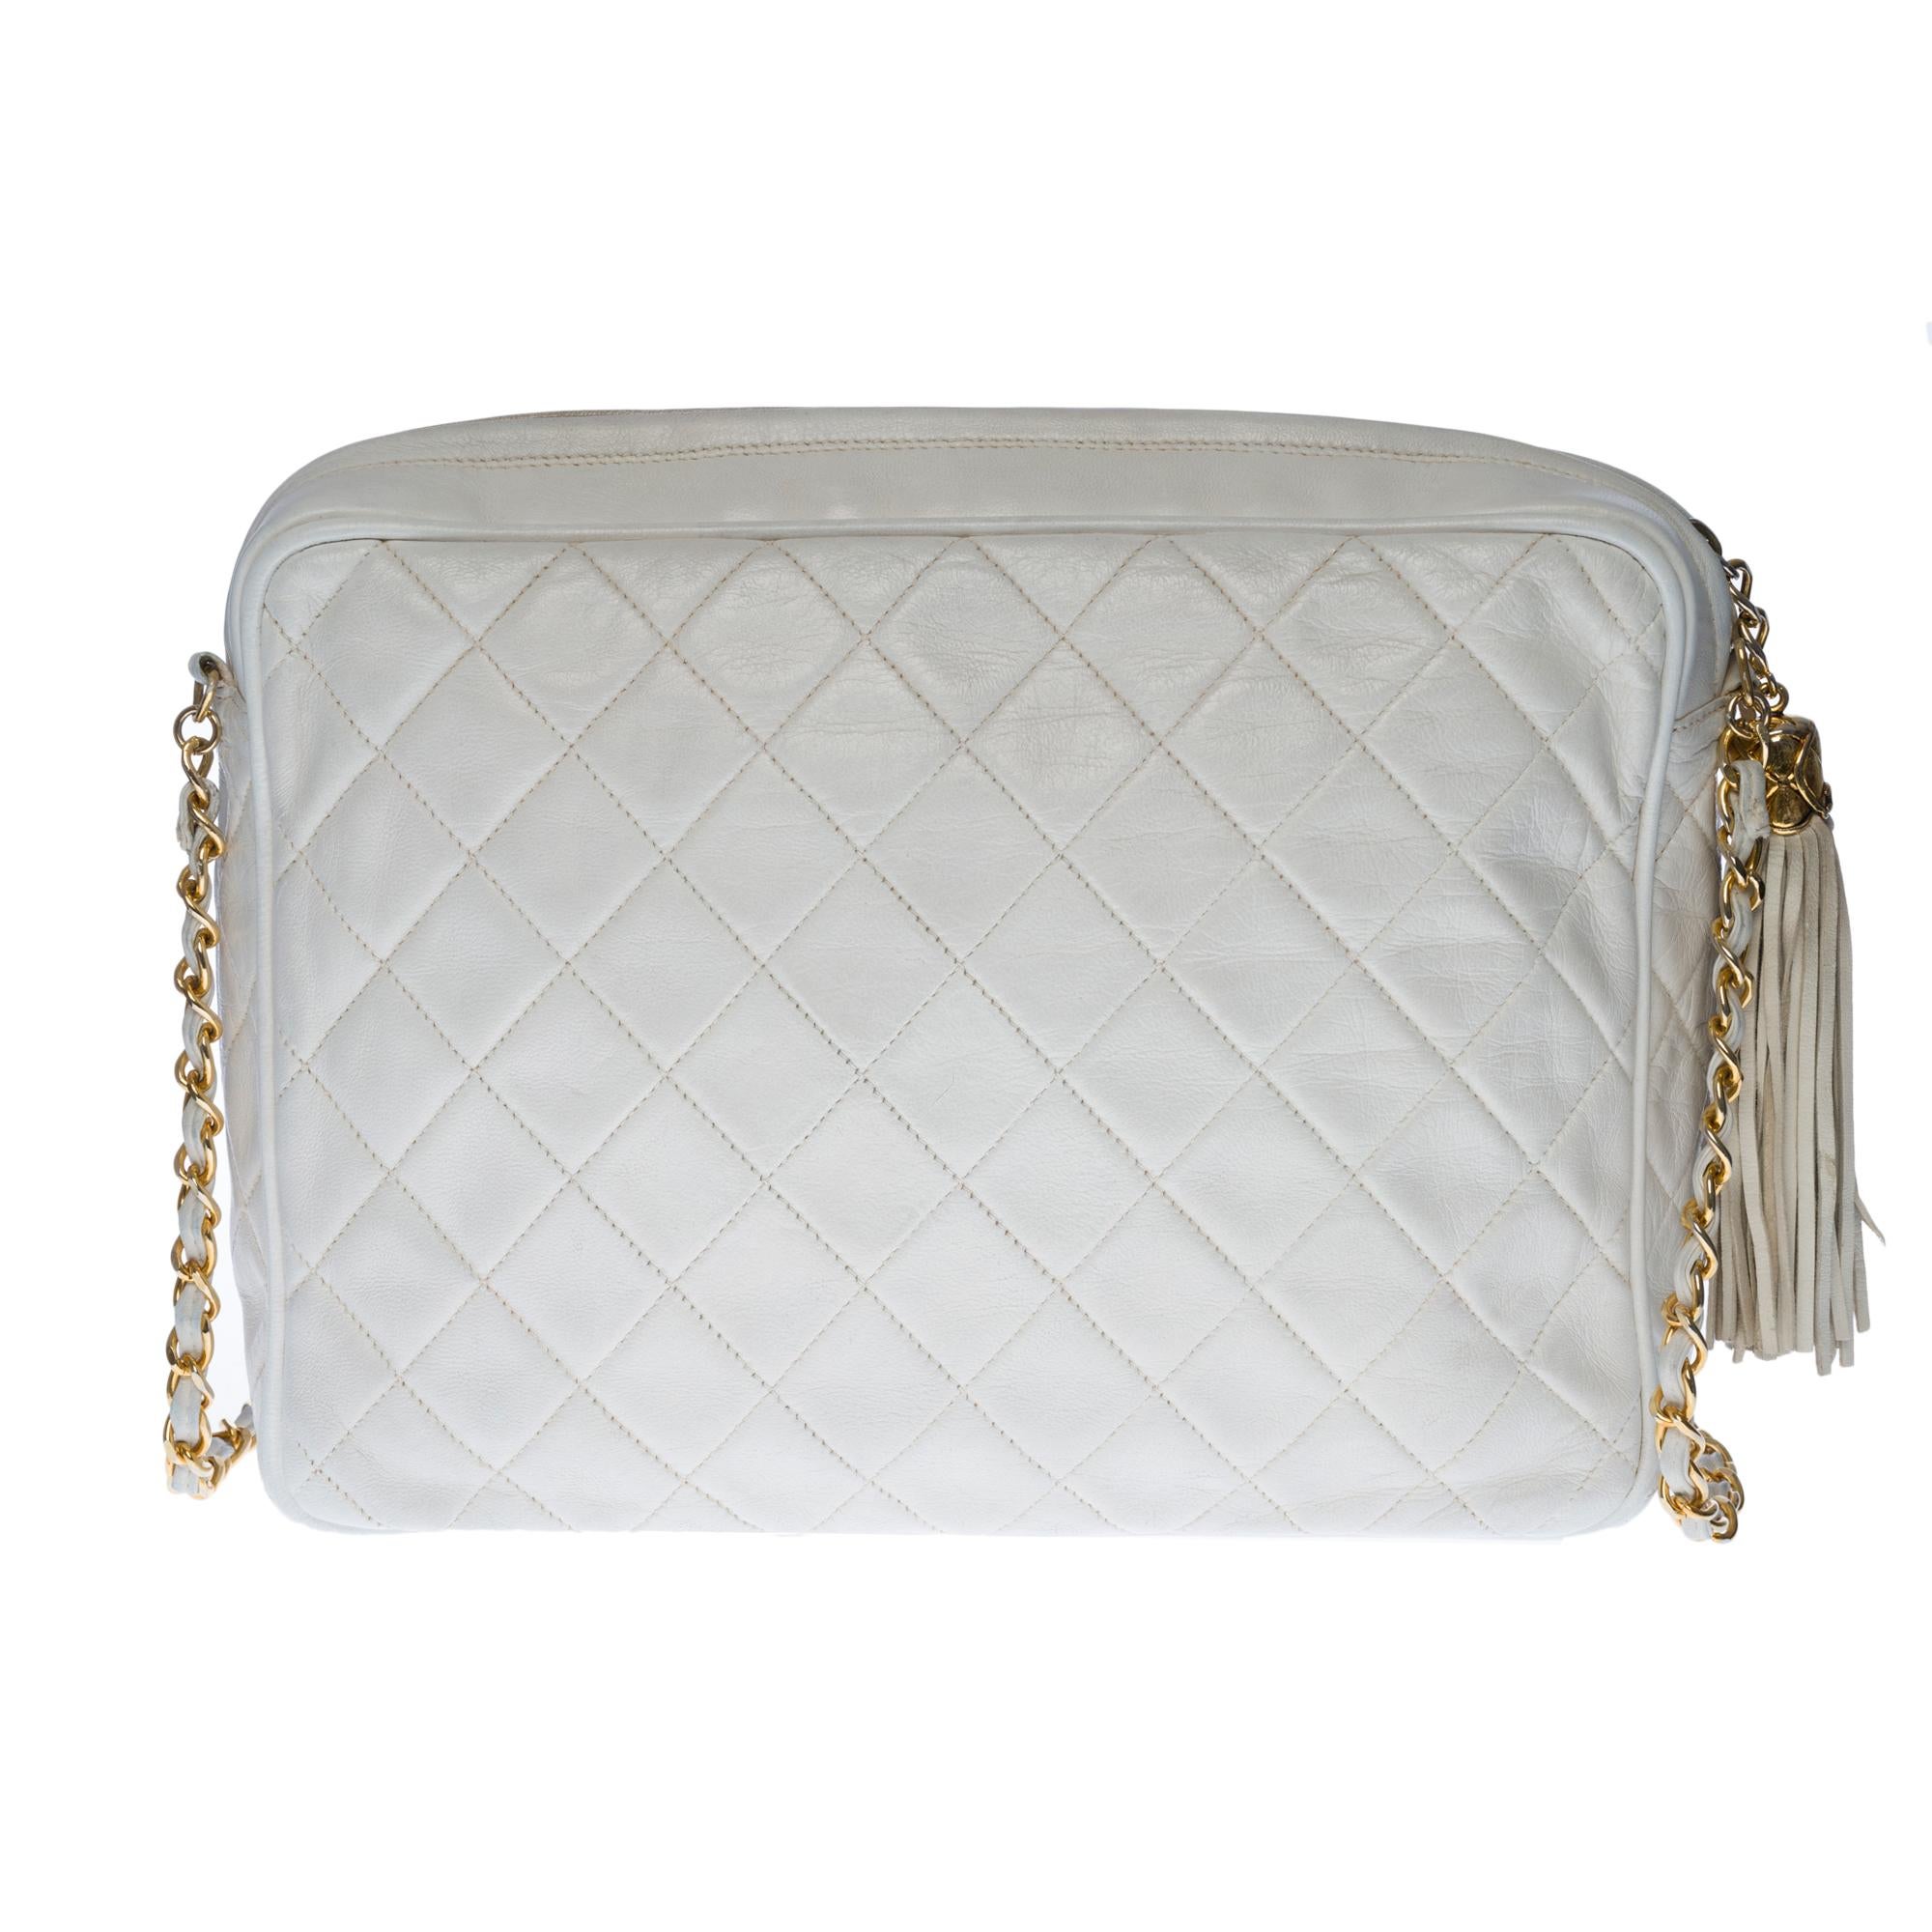 Chanel Camera white quilted leather handbag with gold-tone metal hardware and a gold-tone metal chain handle for hand, shoulder or crossbody support.

It’s a zip fastener.
One pocket with flap closure on the front of the bag
Lining in white leather,